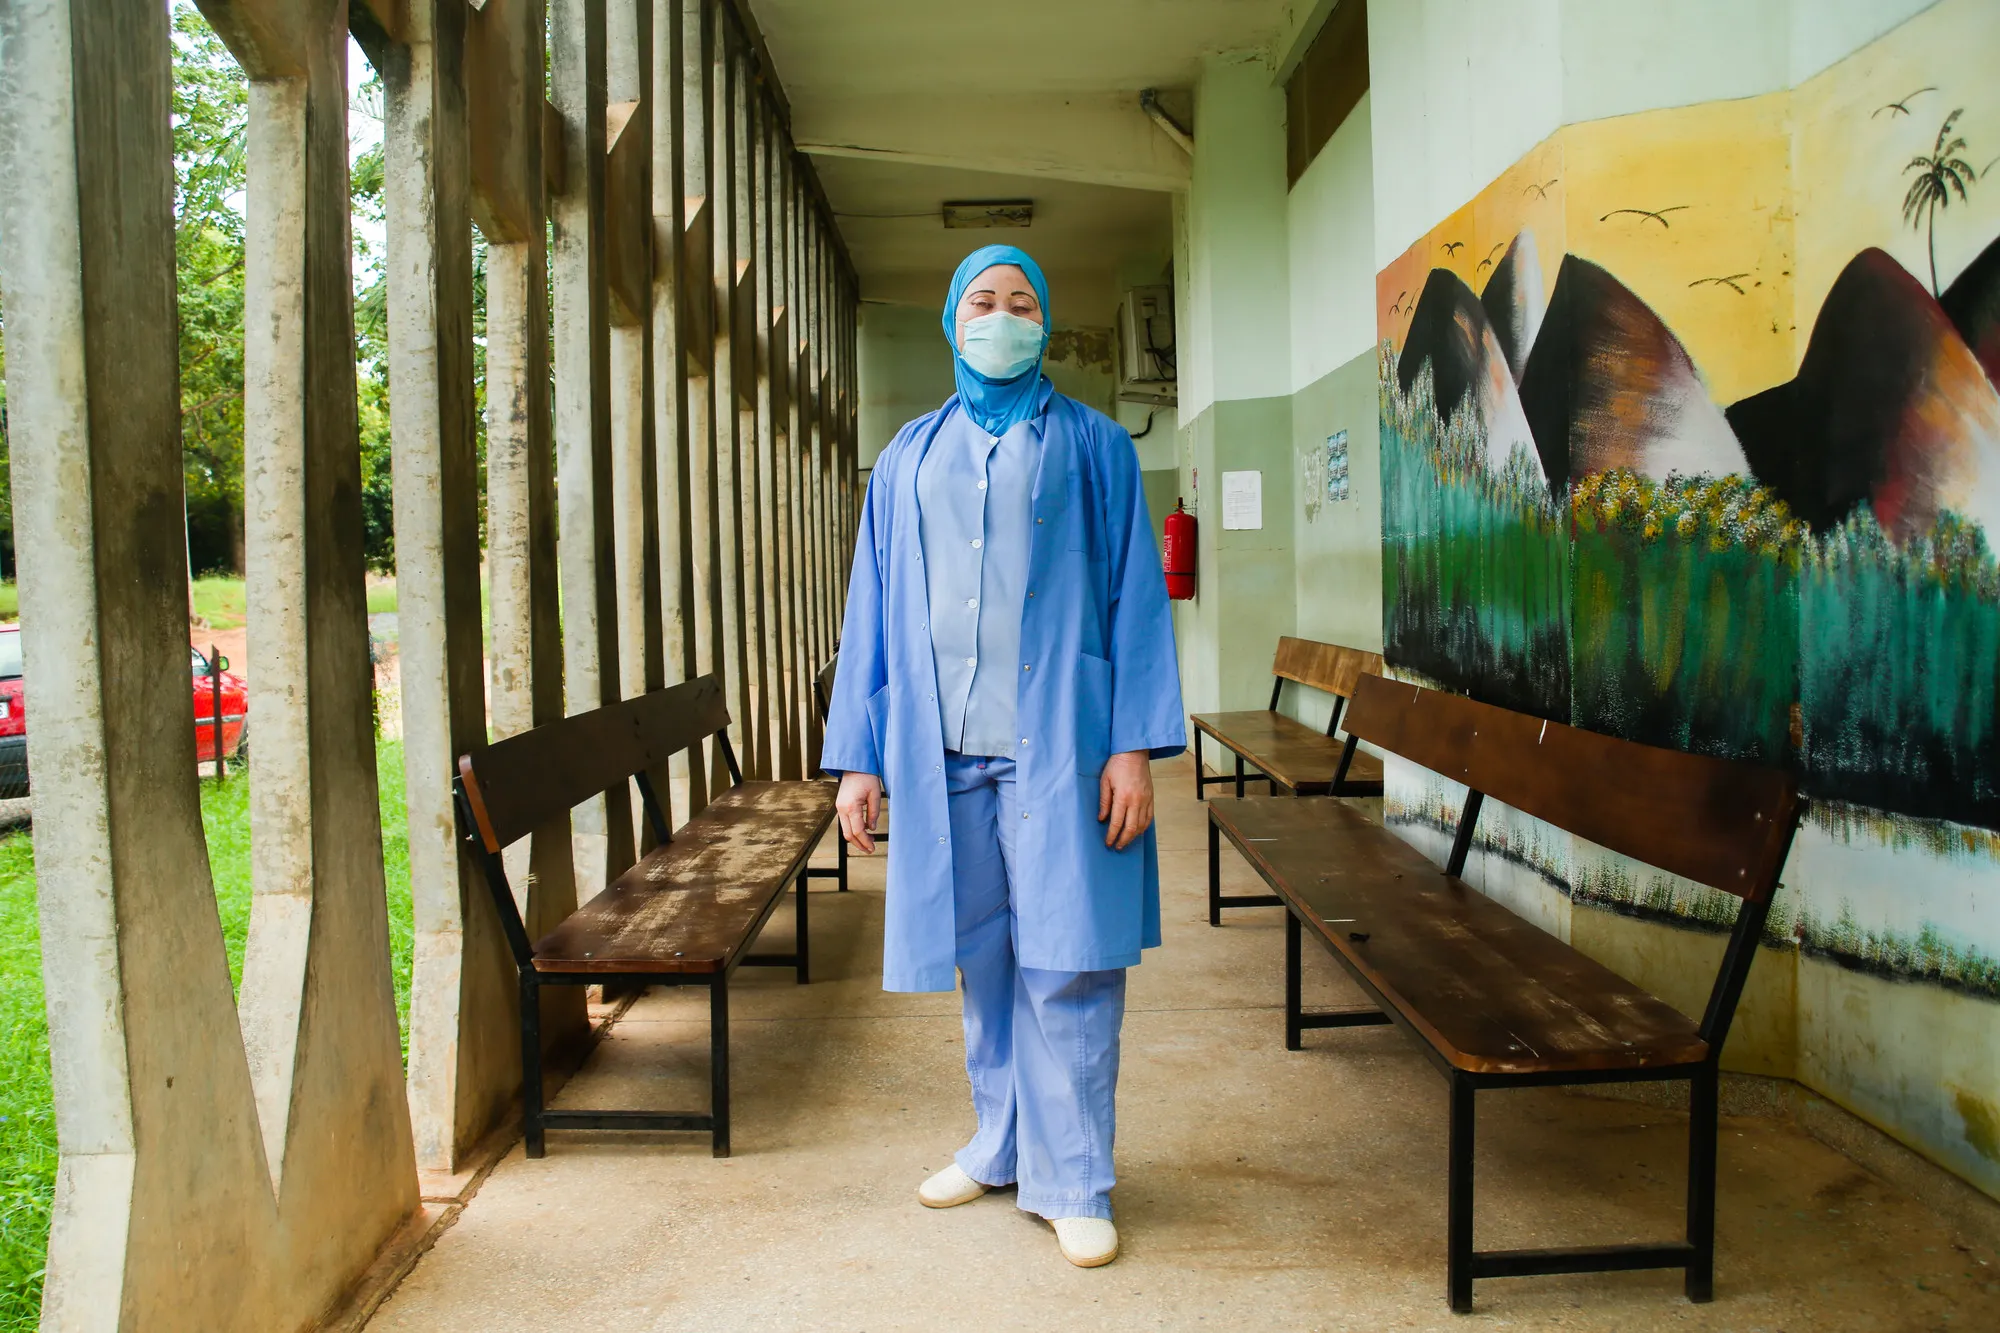 A woman in face mask and scrubs stands in a hallway.